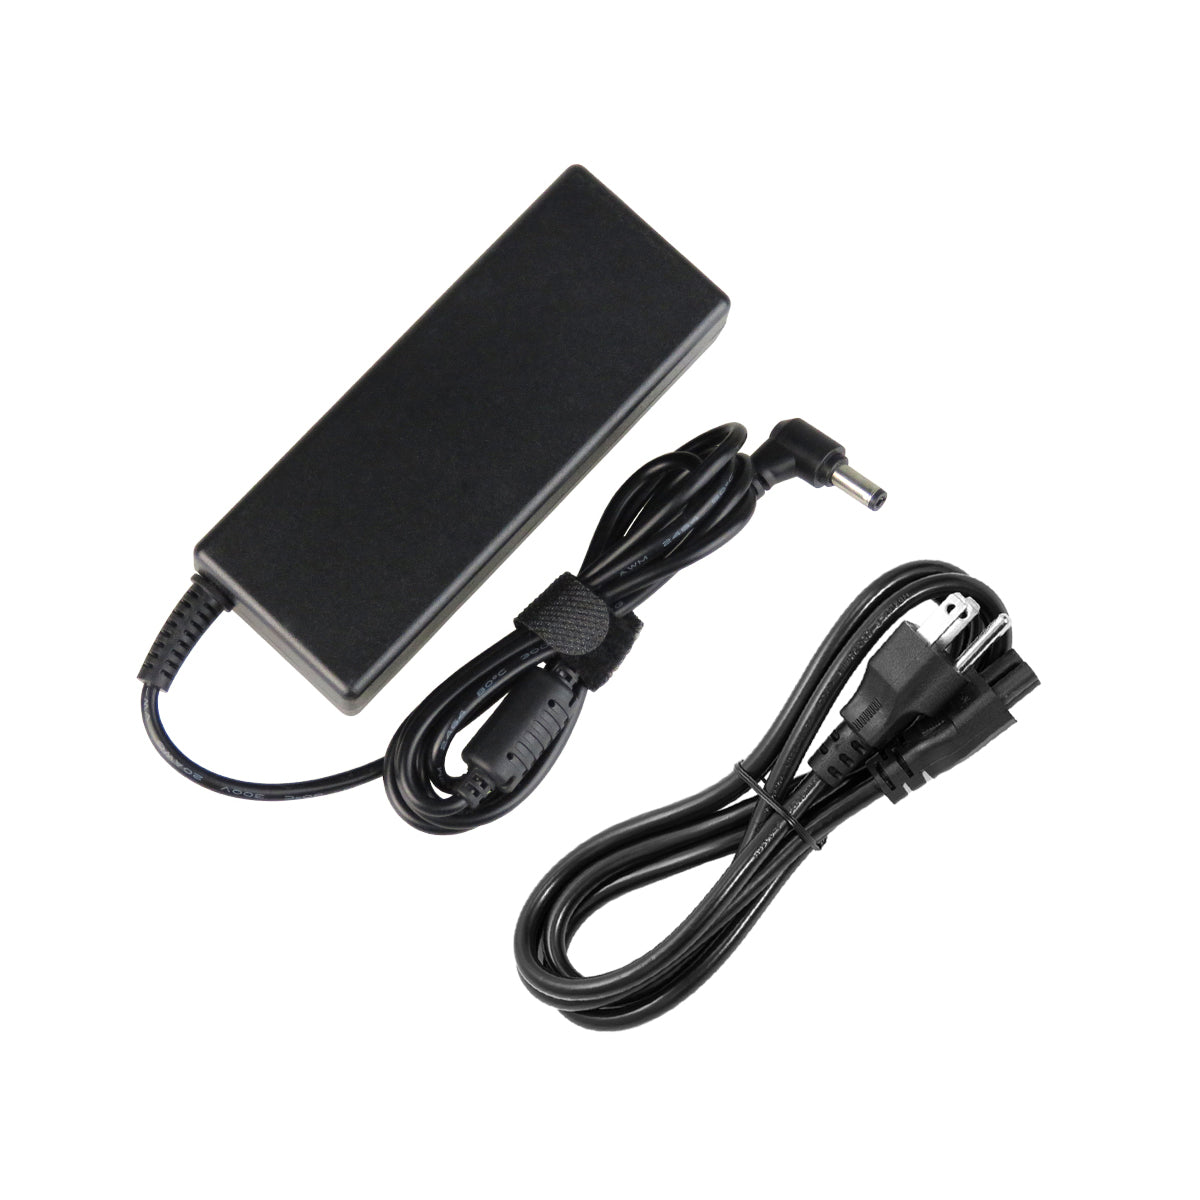 AC Adapter Charger for Gateway MT6707 Notebook.